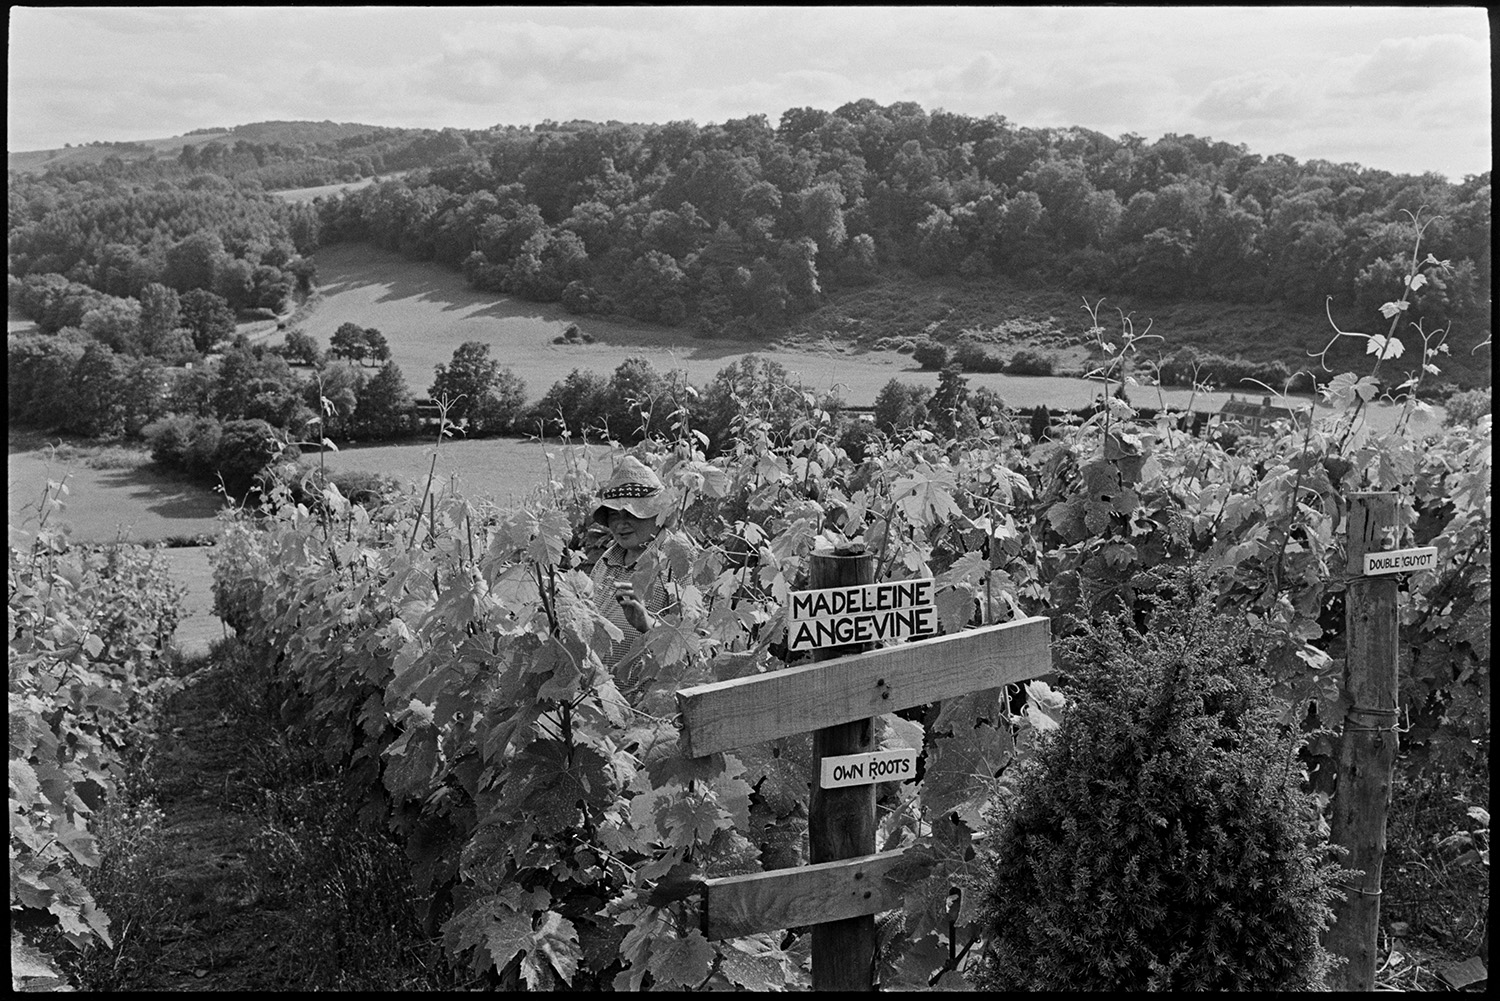 Woman and her vineyard. 
[Gillian Pearks checking the grapes and vines of her Madeleine Angevine variety in her vineyard at Bickleigh. A landscape of fields and woodland is visible in the background.]